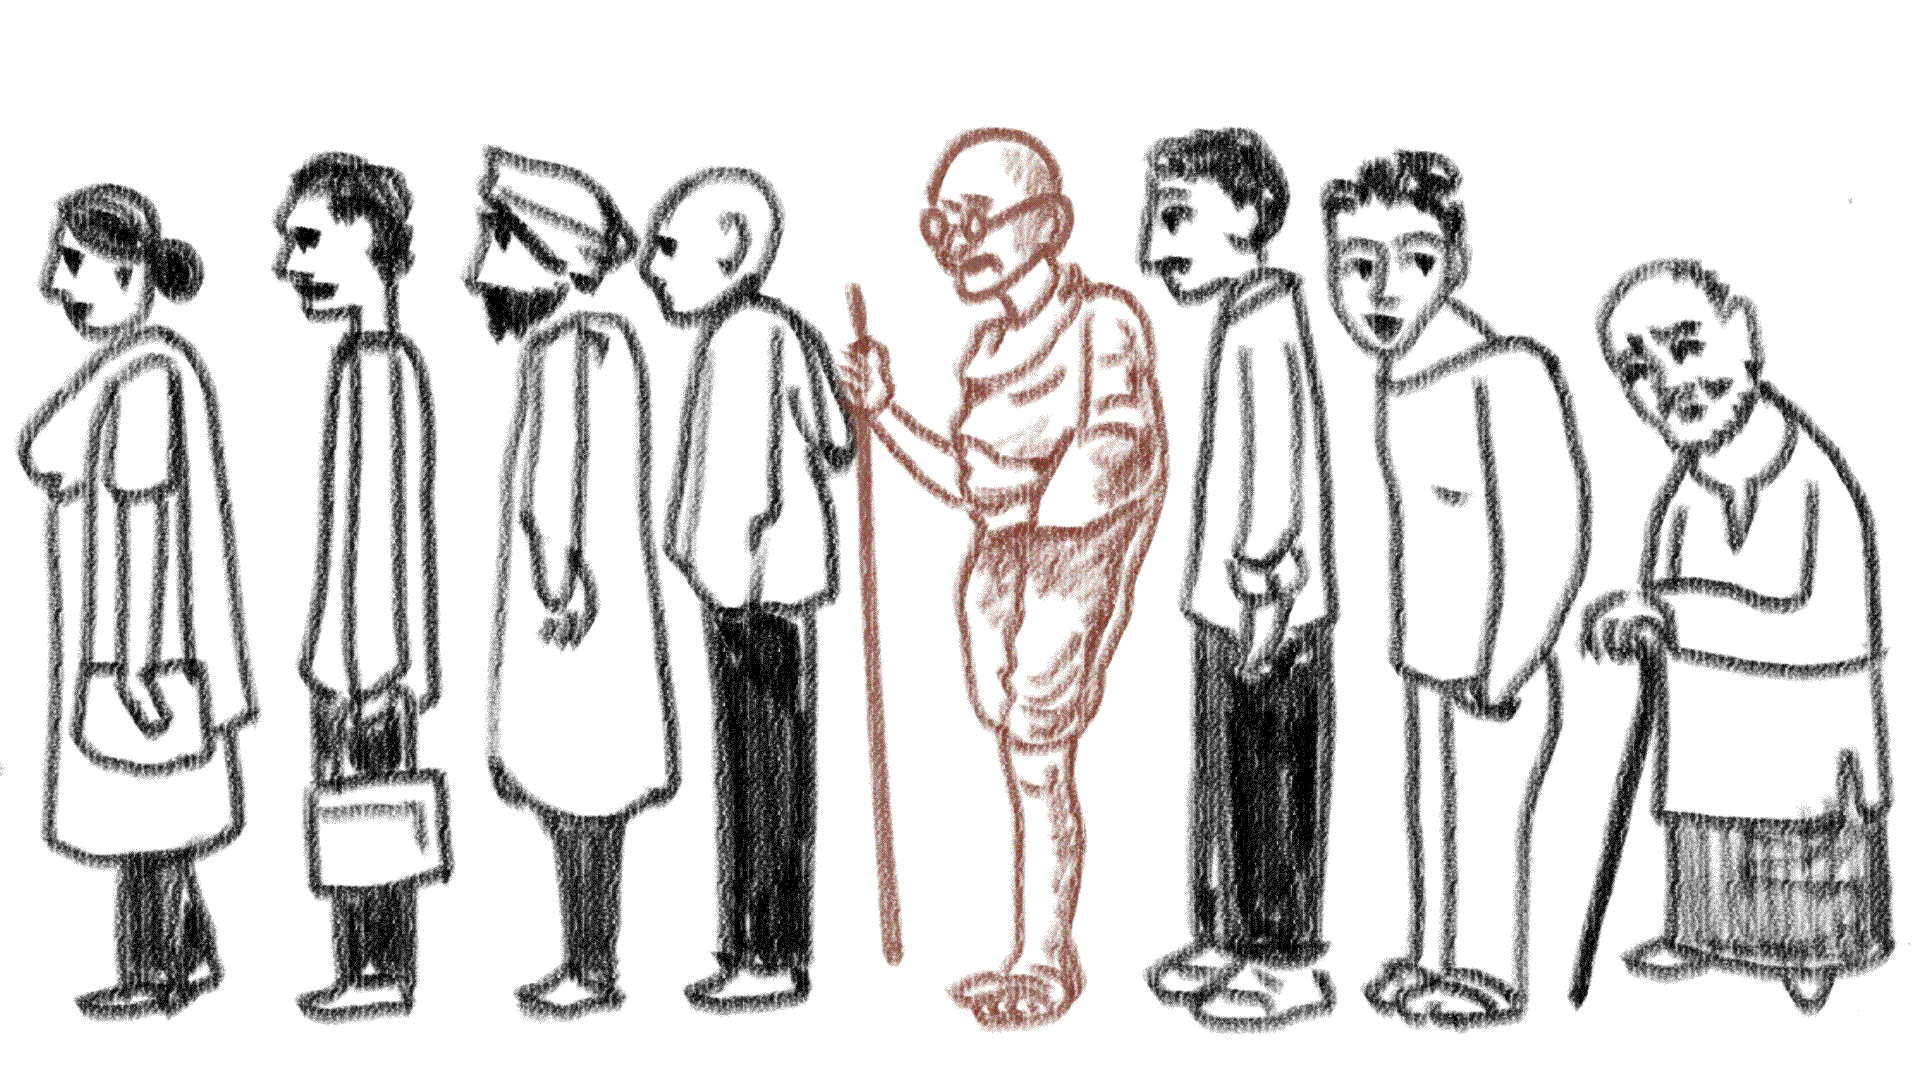 Mahatma Gandhi gets to see demonetisation up close and has a few comments to share. (Graphic: Susnata Paul/<b>The Quint</b>)